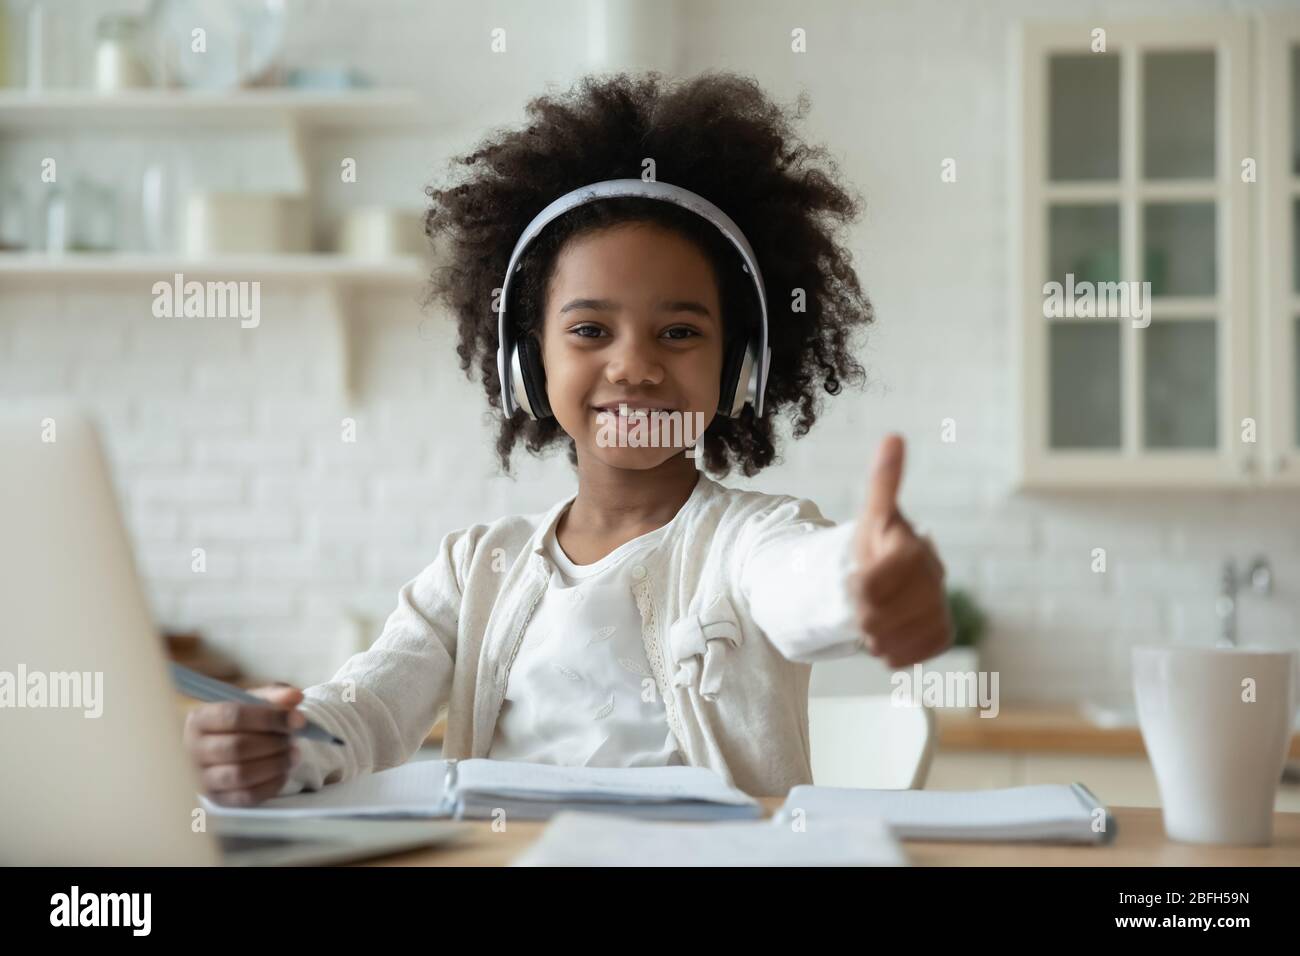 Smiling biracial little girl recommend online course Stock Photo